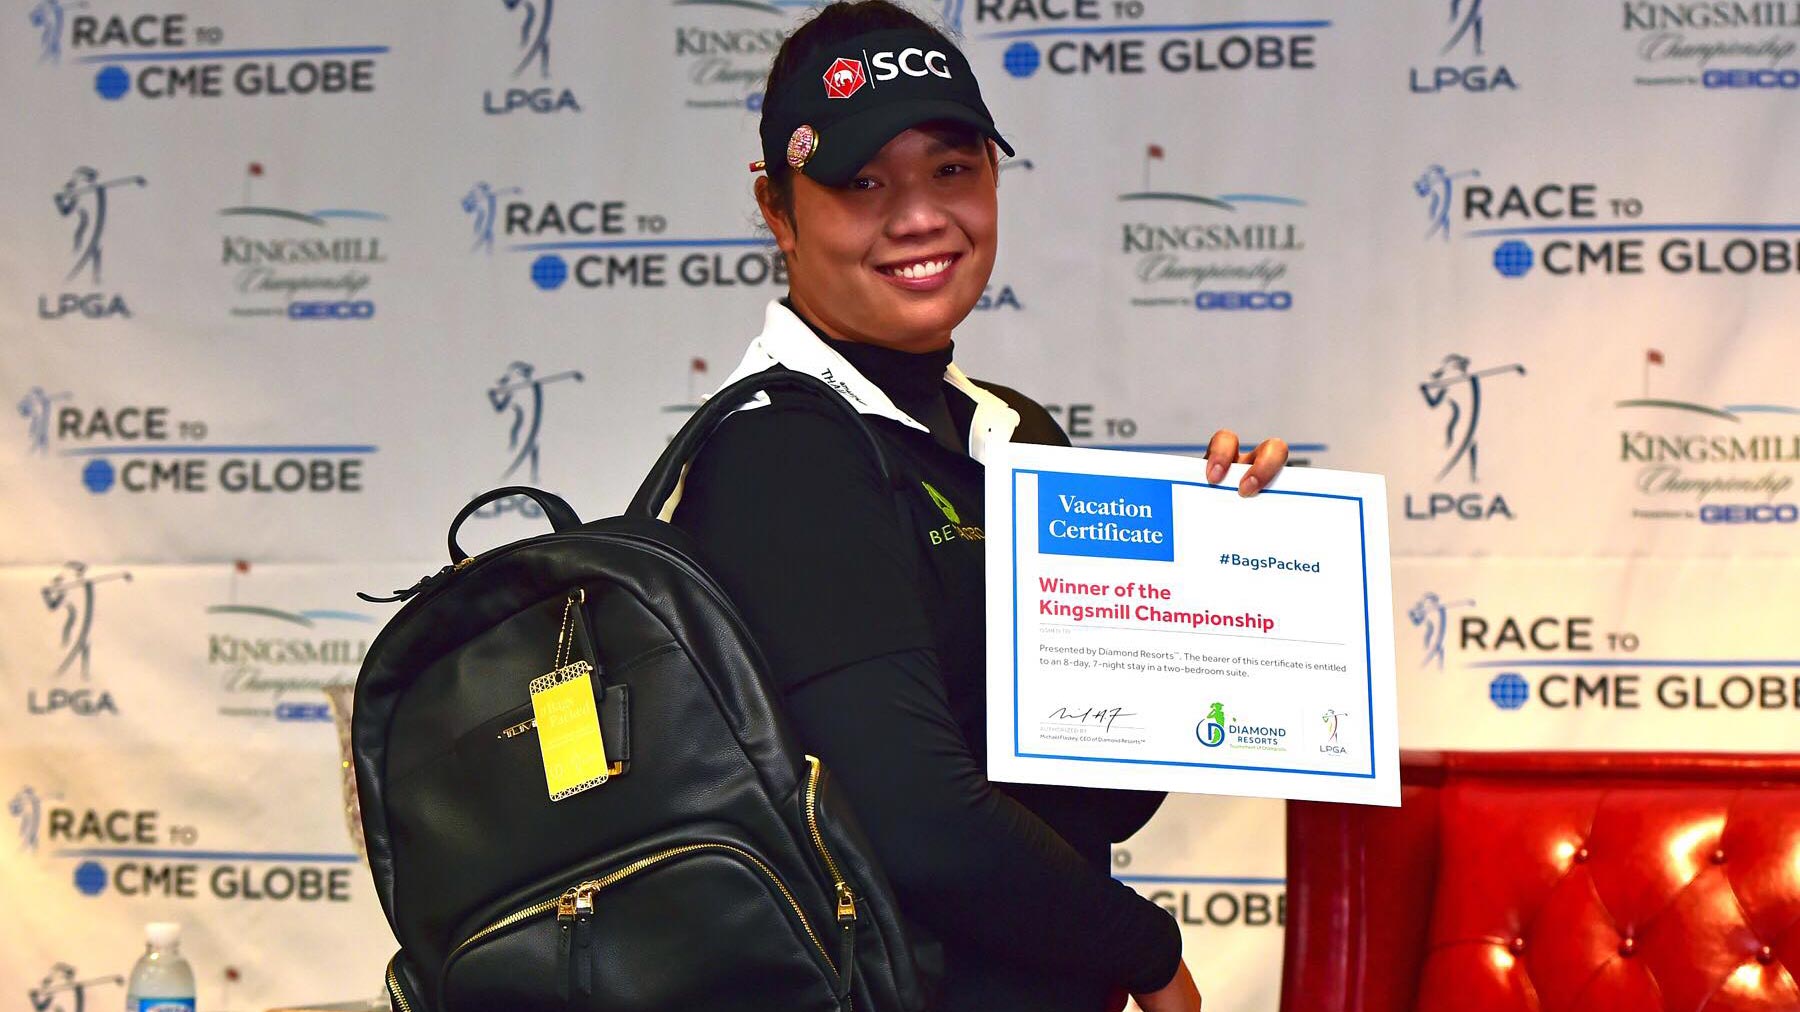 Ariya Jutanugarn has her #BagsPacked for the 2019 Diamond Resorts Tournament of Champions after her win at the 2018 Kingsmill Championship presented by GEICO